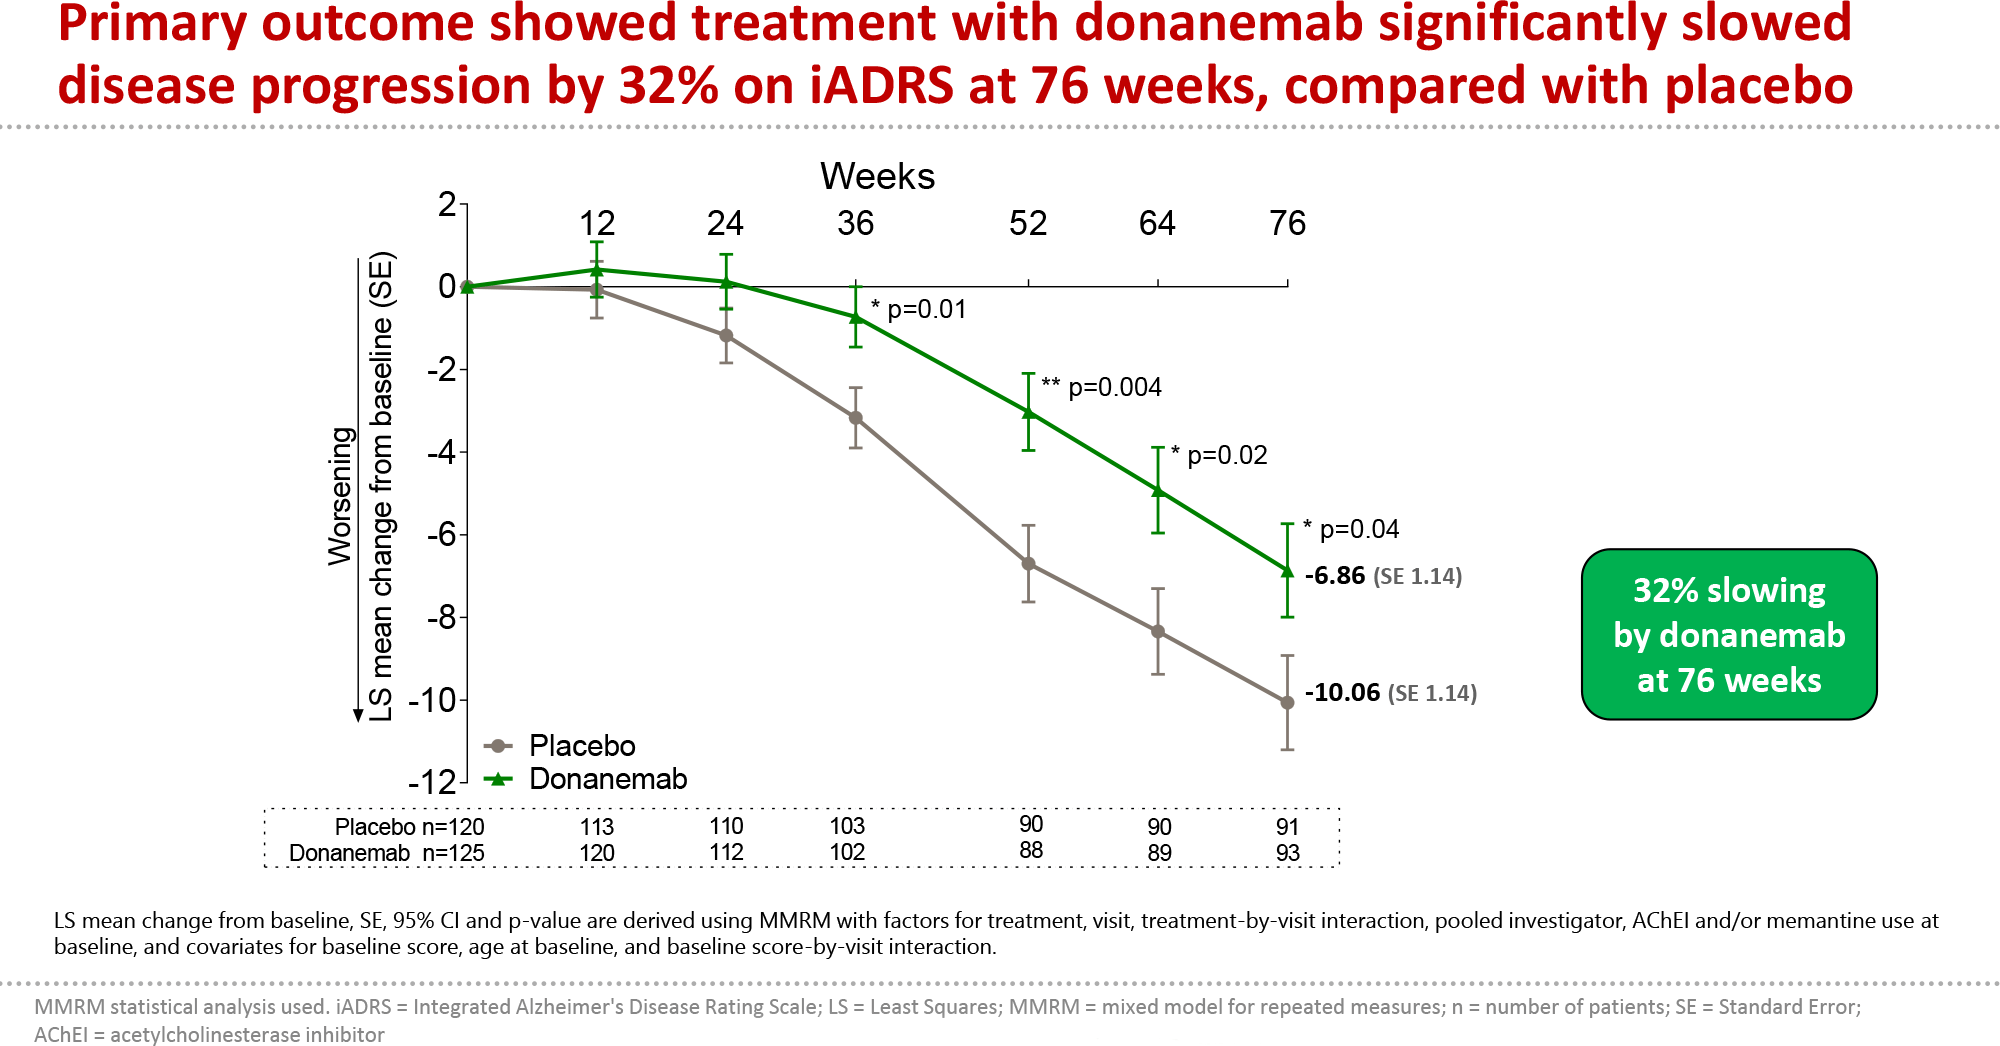 nct03367403 results 01 - Donanemab: Possible Treatment for Alzheimer’s Disease